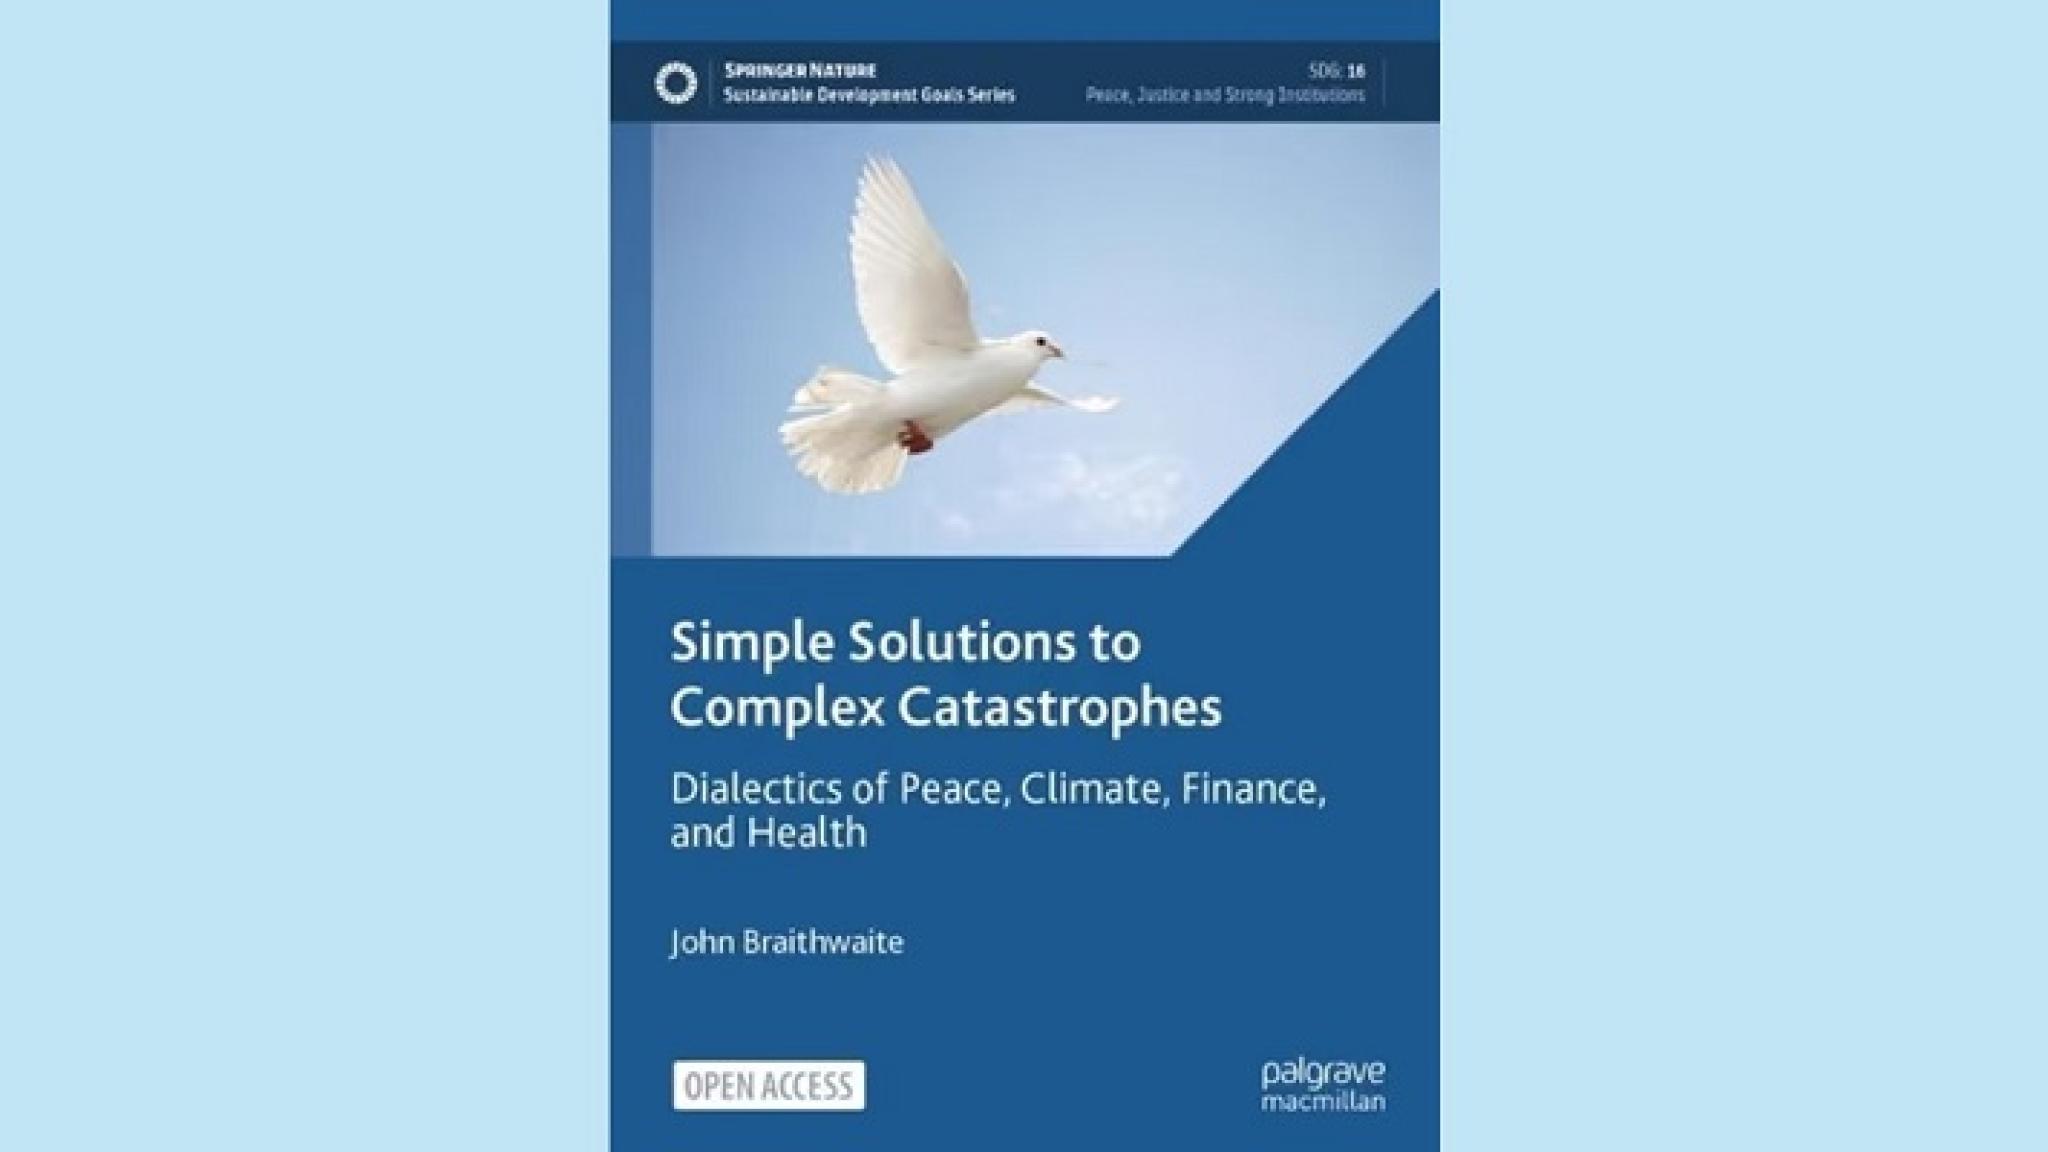 'Simple solutions to complex catastrophes: dialectics of peace, climate, finance, and health' book cover from https://media.springernature.com/w138/springer-static/cover/book/9783031487477.jpg